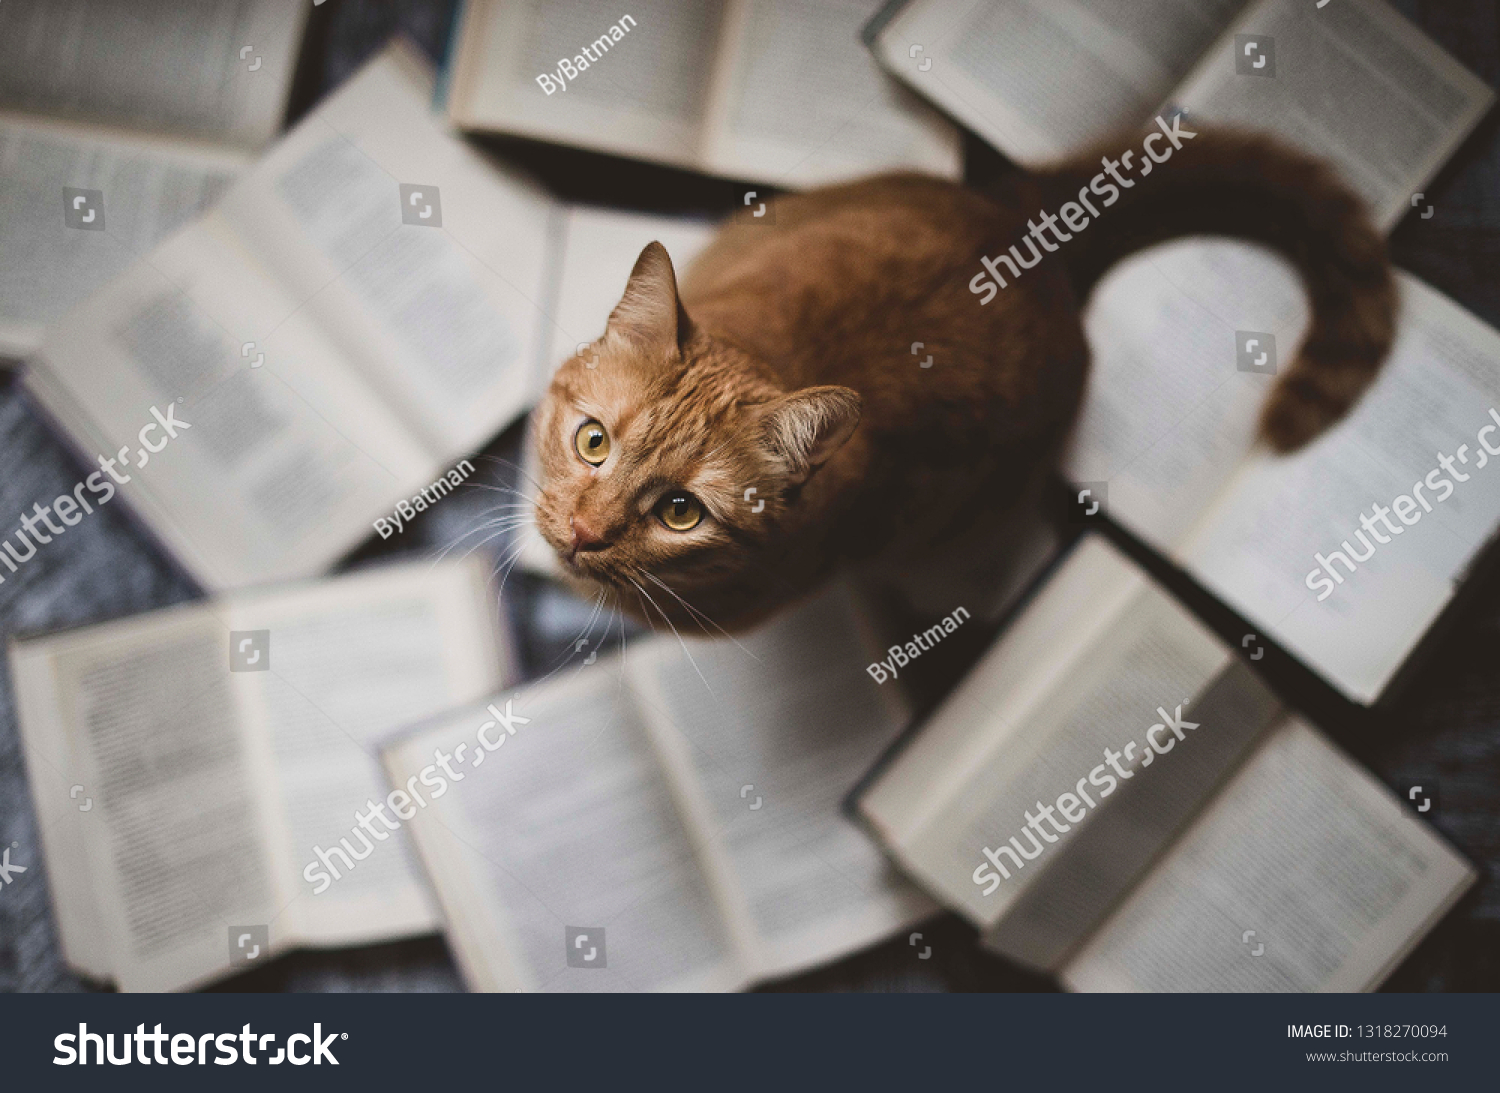 red cute cat sitting on open books laid out on the floor. funny cat face looks into the camera #1318270094